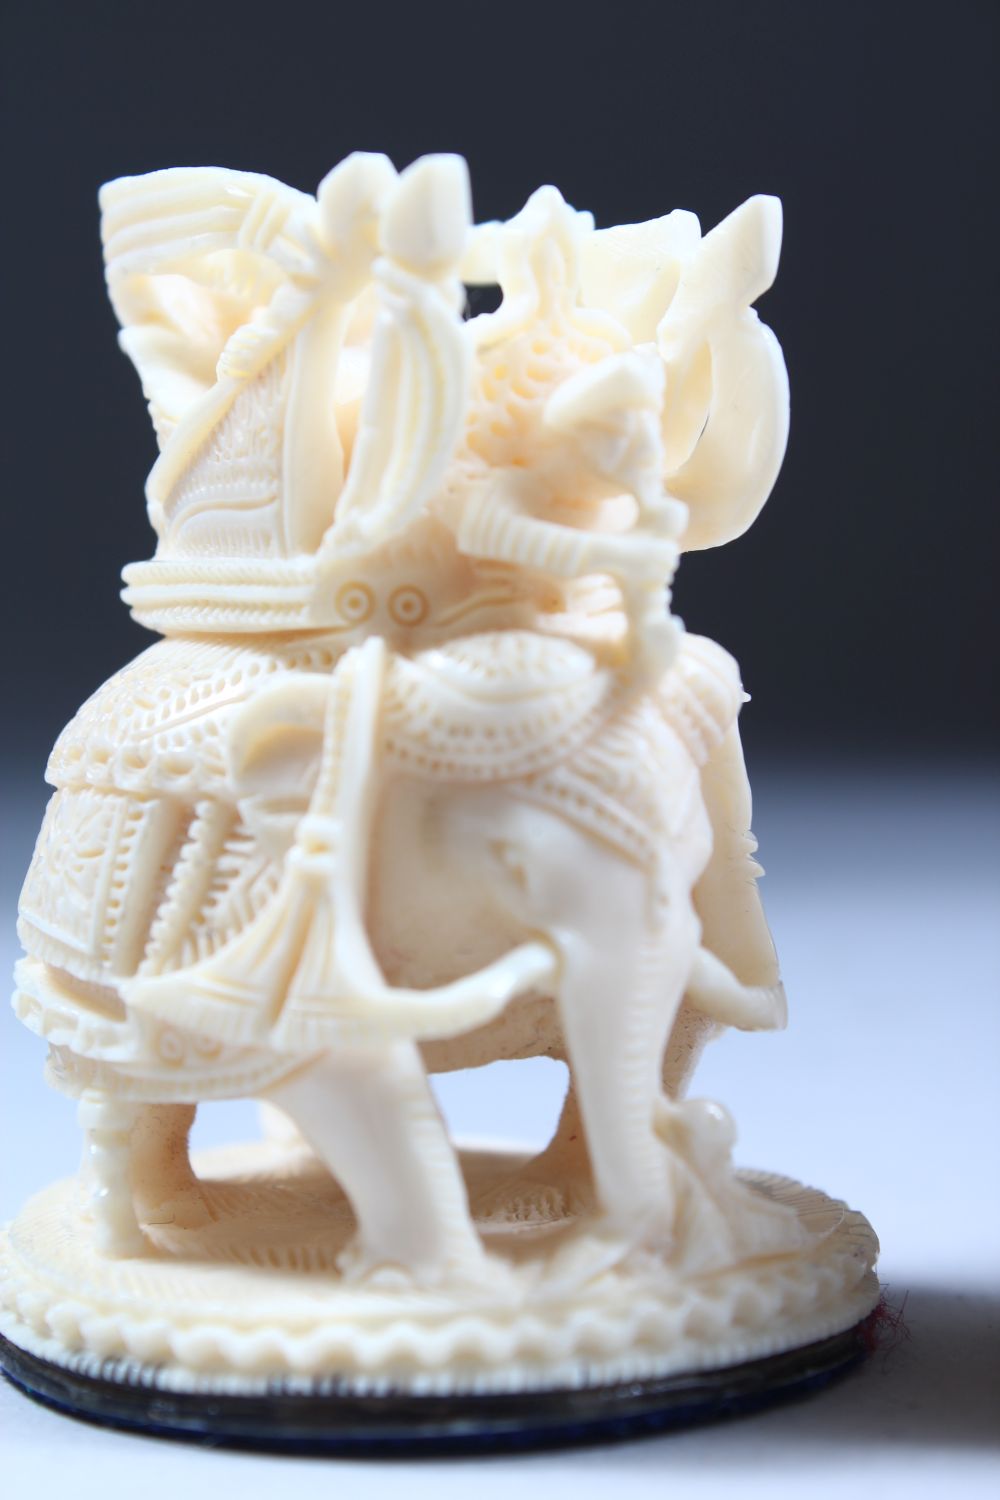 A GOOD 19TH / 20TH CENTURY INDIAN CARVED IVORY CHESS SET IN ORIGINAL BOX, from 10cm high down to 2. - Image 10 of 12